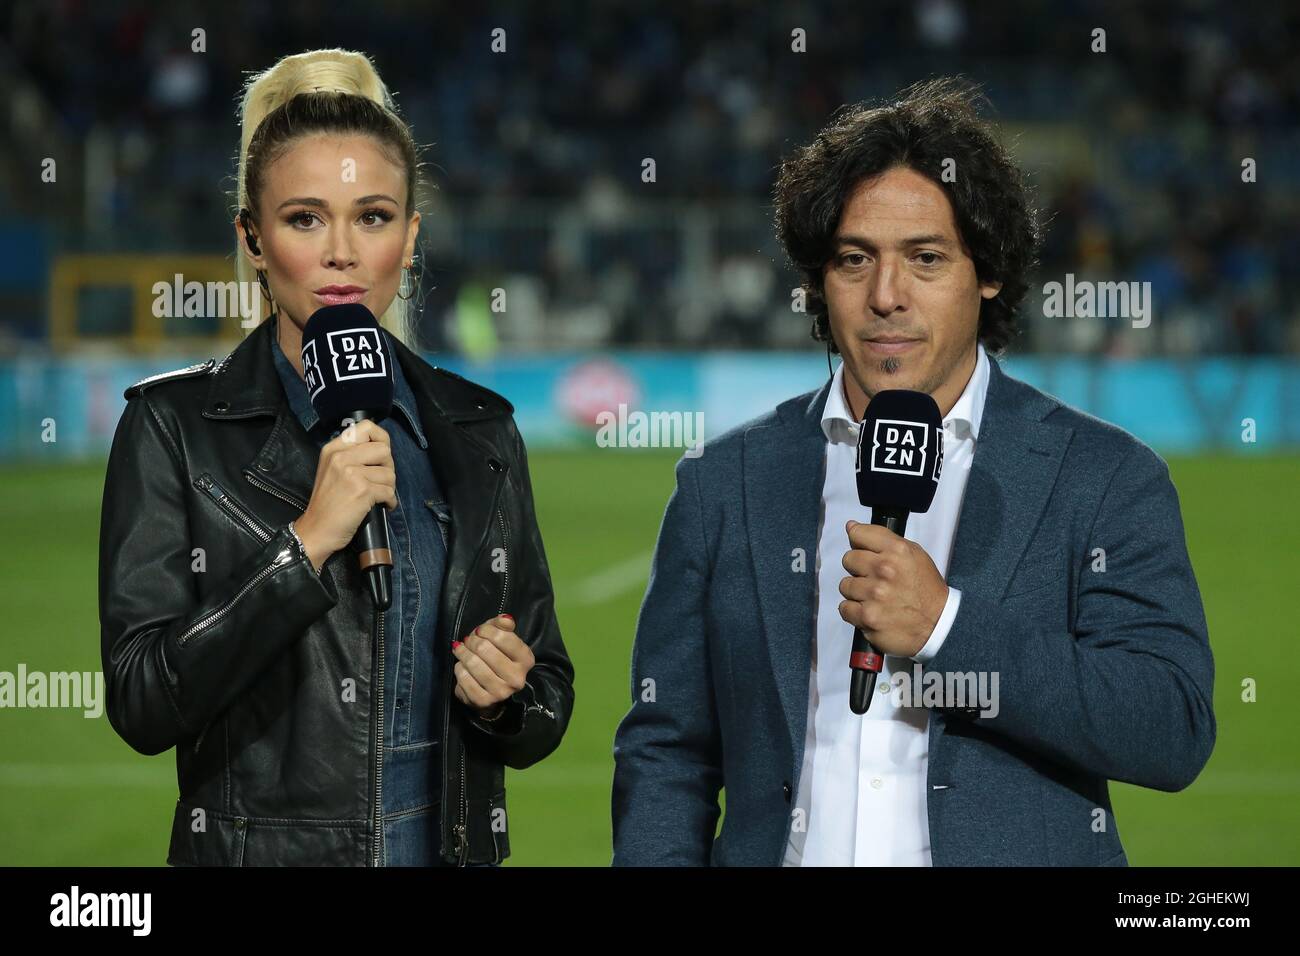 Diletta Leotta Tv Presenter And Former Juventus And Italy Player Mauro German Camoranesi Now A Tv Pundit For Dazn Pictured Pitchside During The Serie A Match At Stadio Mario Rigamonti Brescia Picture